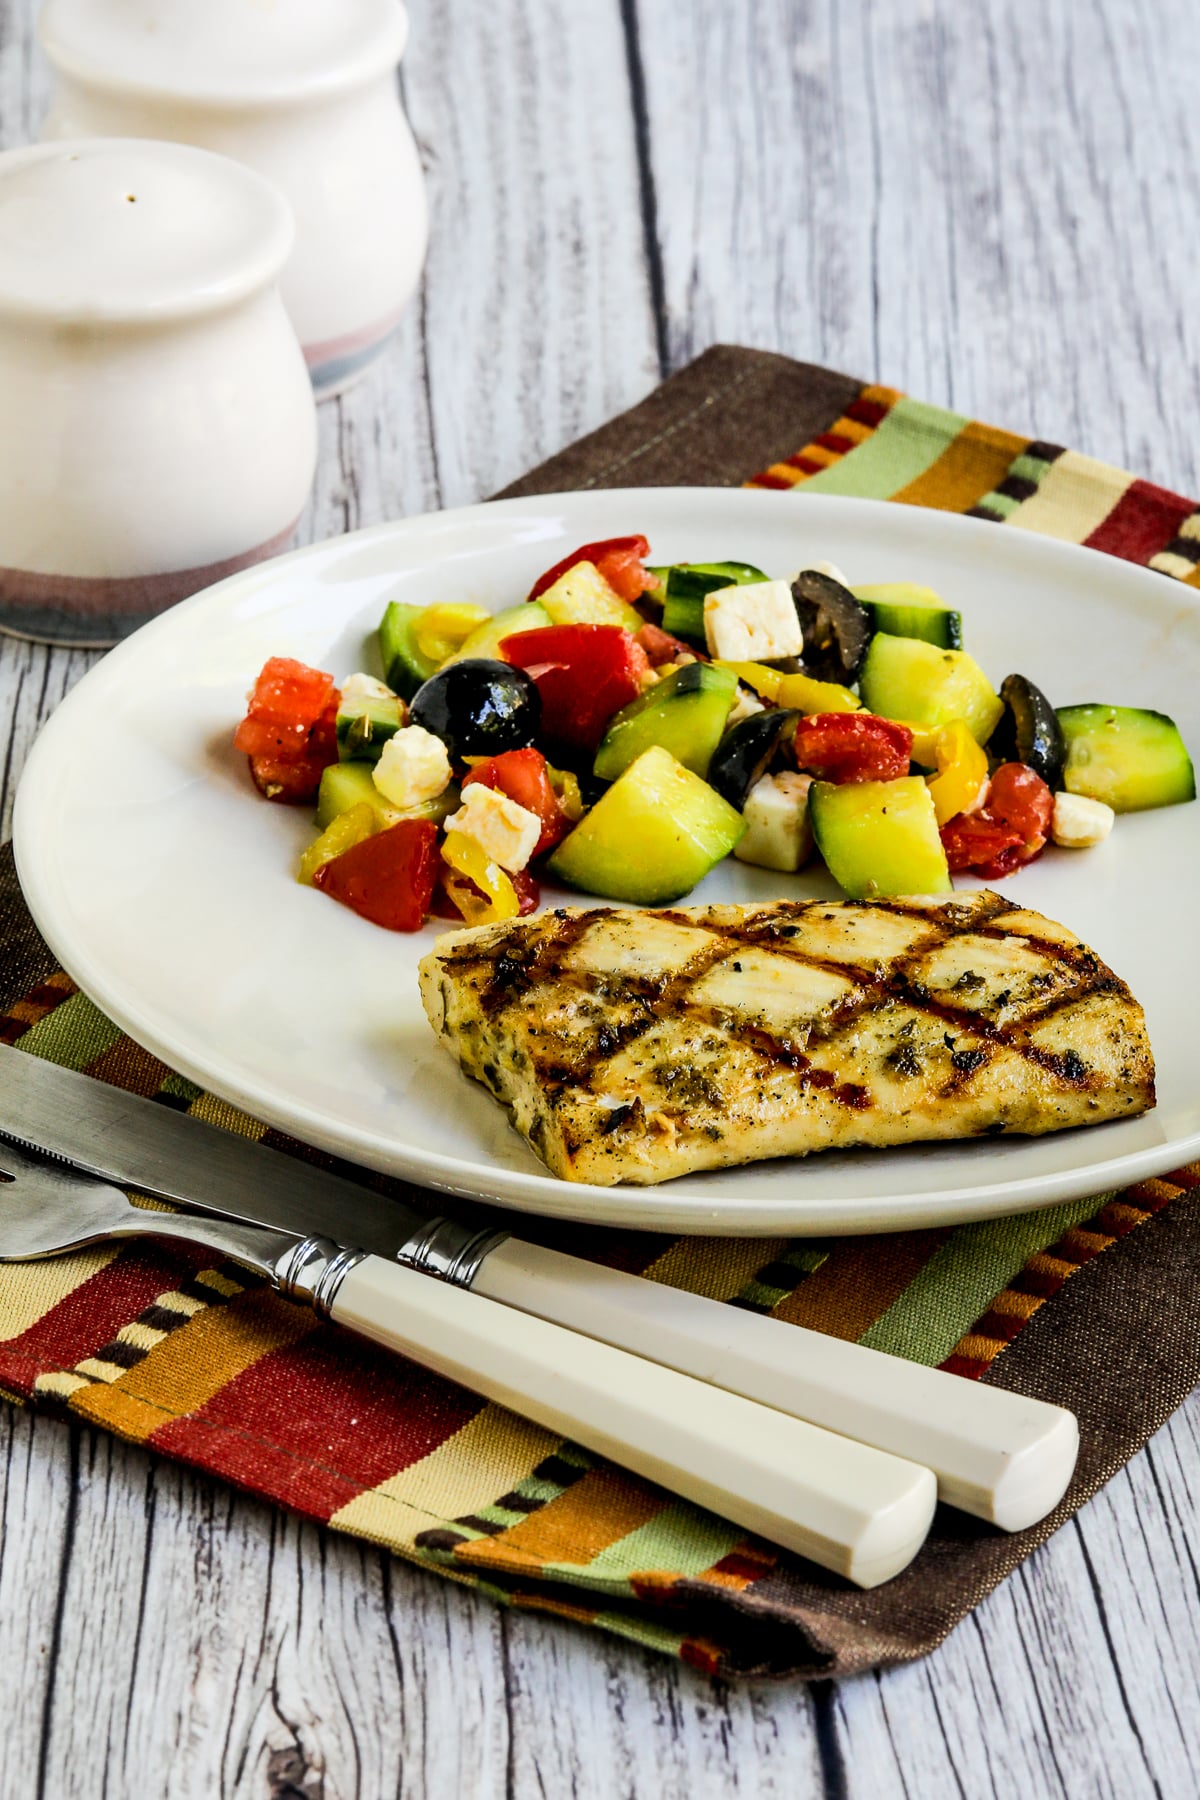 Grilled Fish with Lemon and Capers shown on plate with salad.